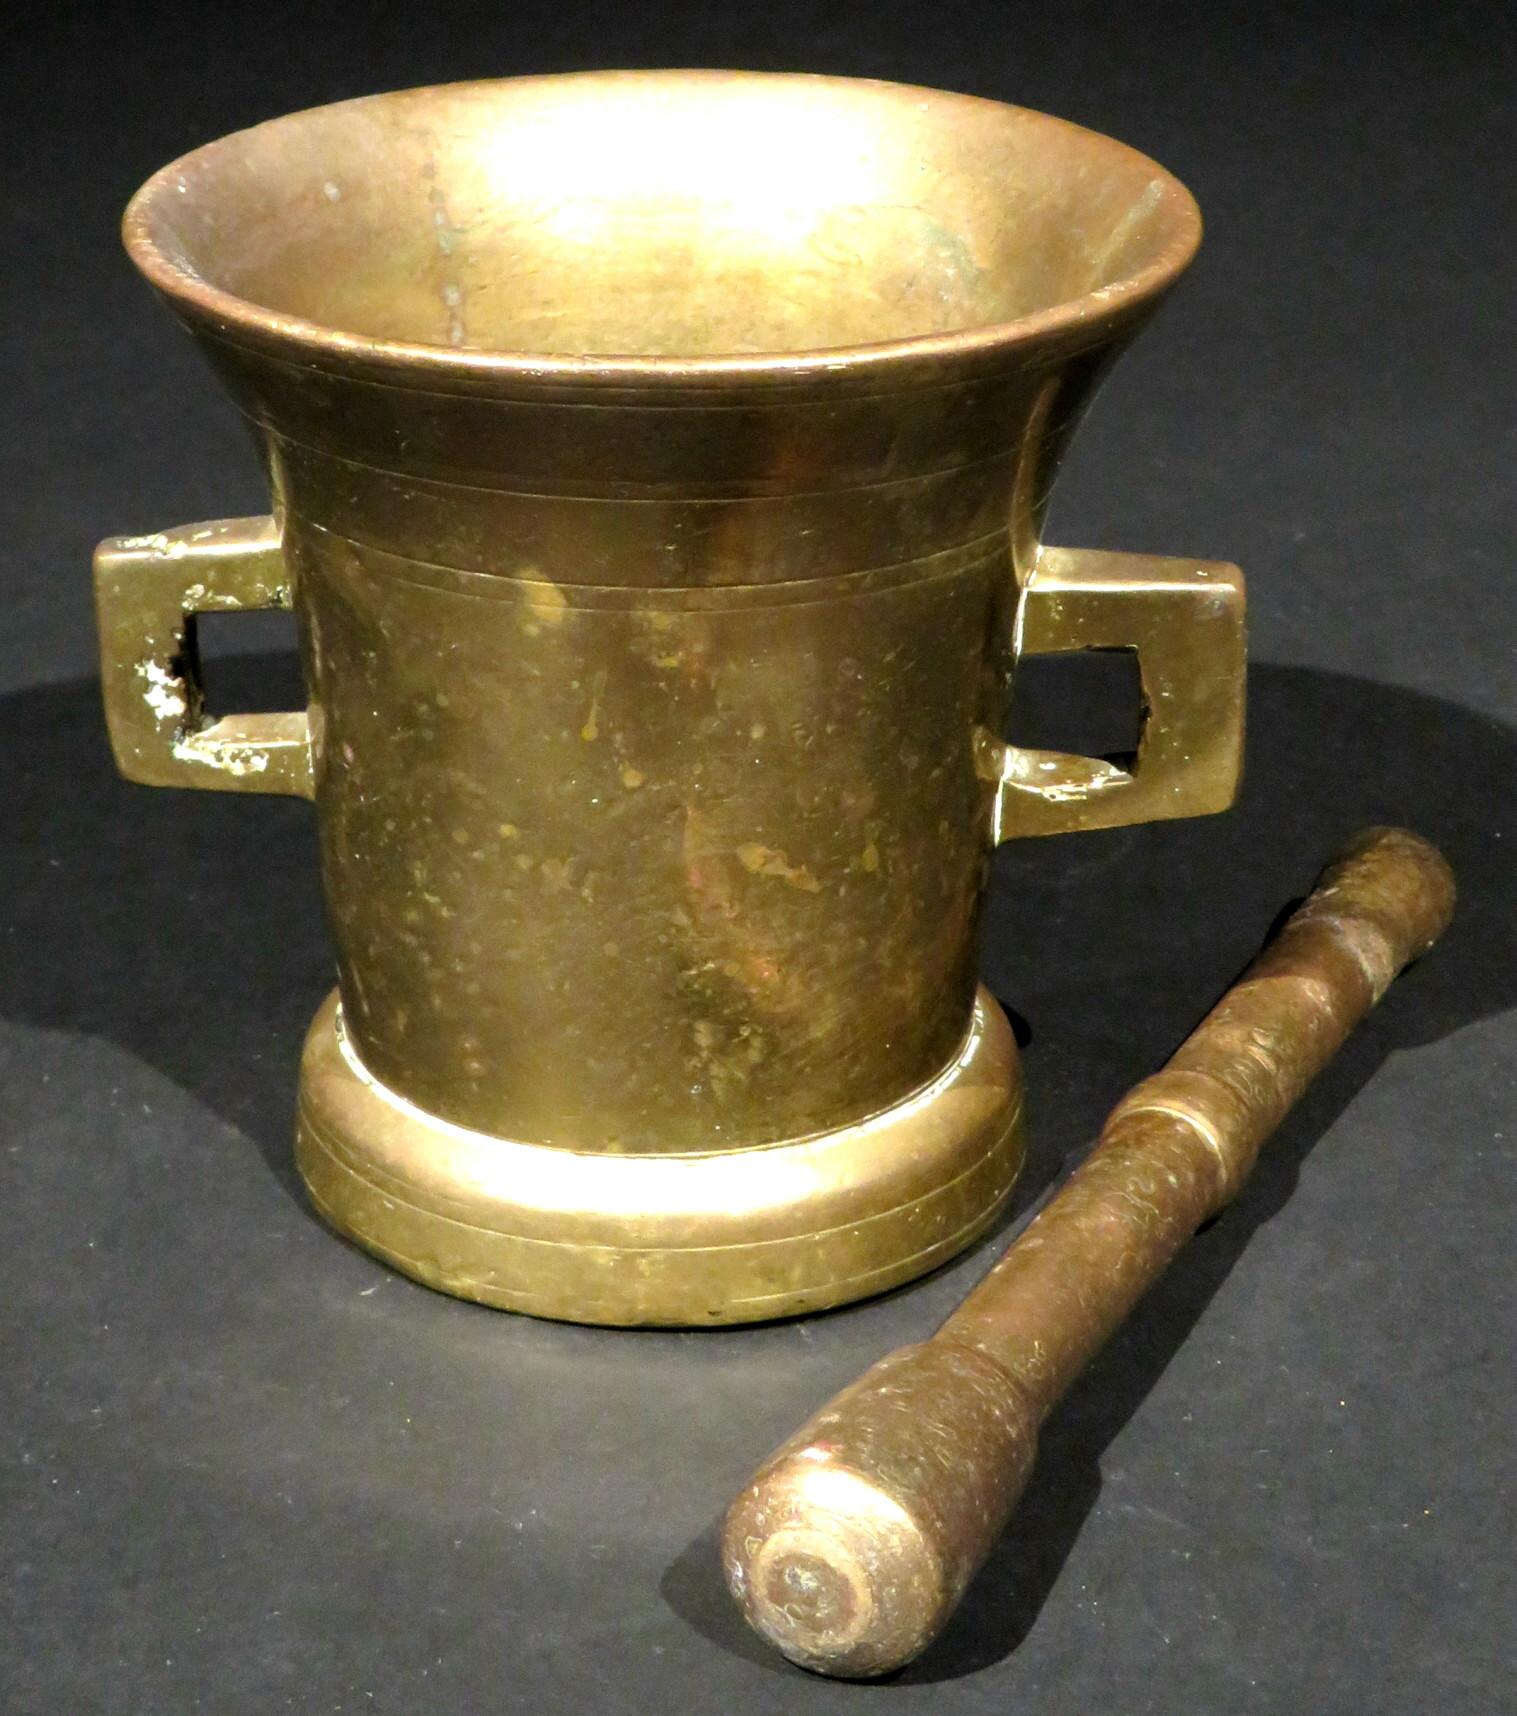 The cast body of flaring form with incised ring-turned detail, rising from a compressed foot and sided by twin open handles, together with what appear to be its original pestle.
Combined weight, 6 lbs.
